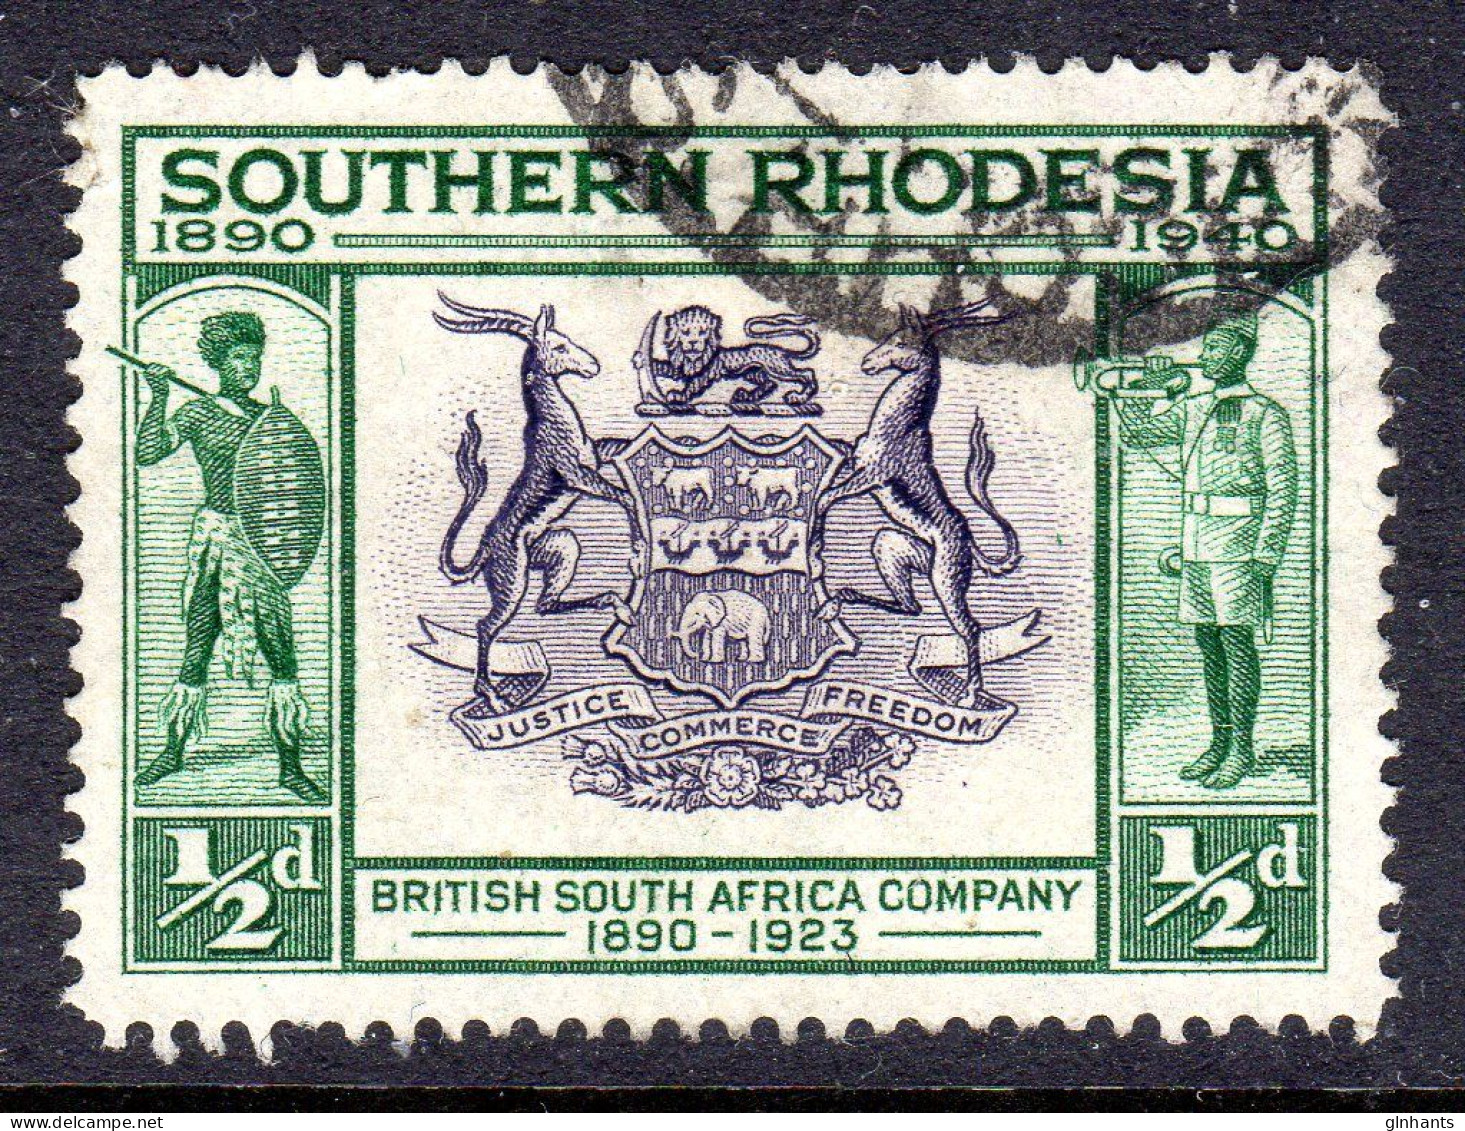 SOUTHERN RHODESIA - 1940 SOUTH AFRICA COMPANY ANNIVERSARY ½d STAMP FINE USED SG 53 - Southern Rhodesia (...-1964)